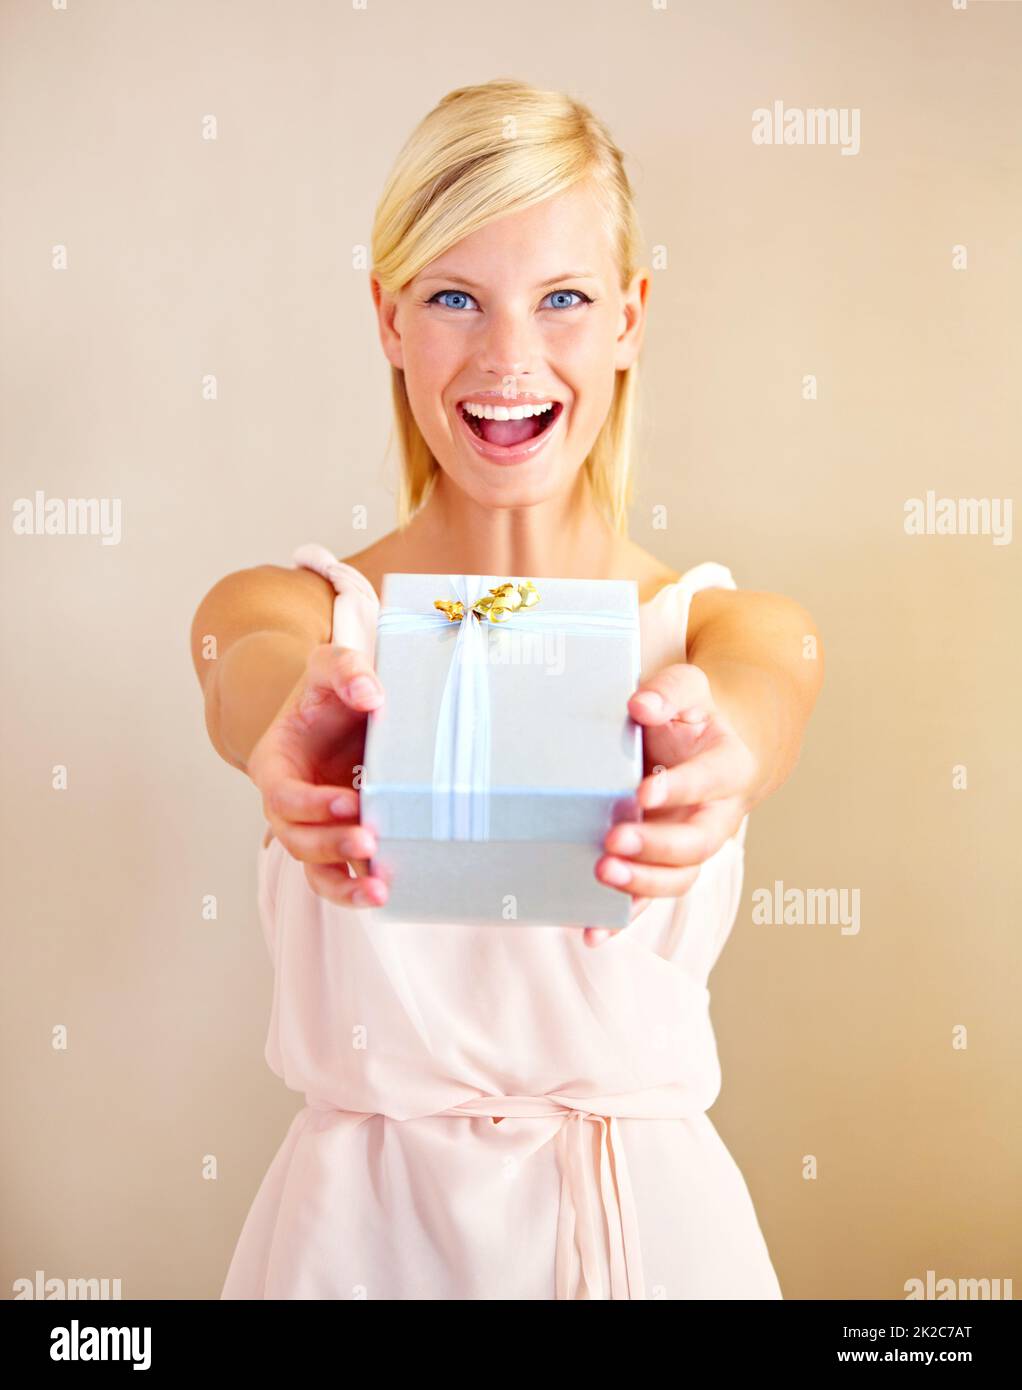 Surprise - its for you. Portrait of a young woman holding out a gift box and smiling. Stock Photo